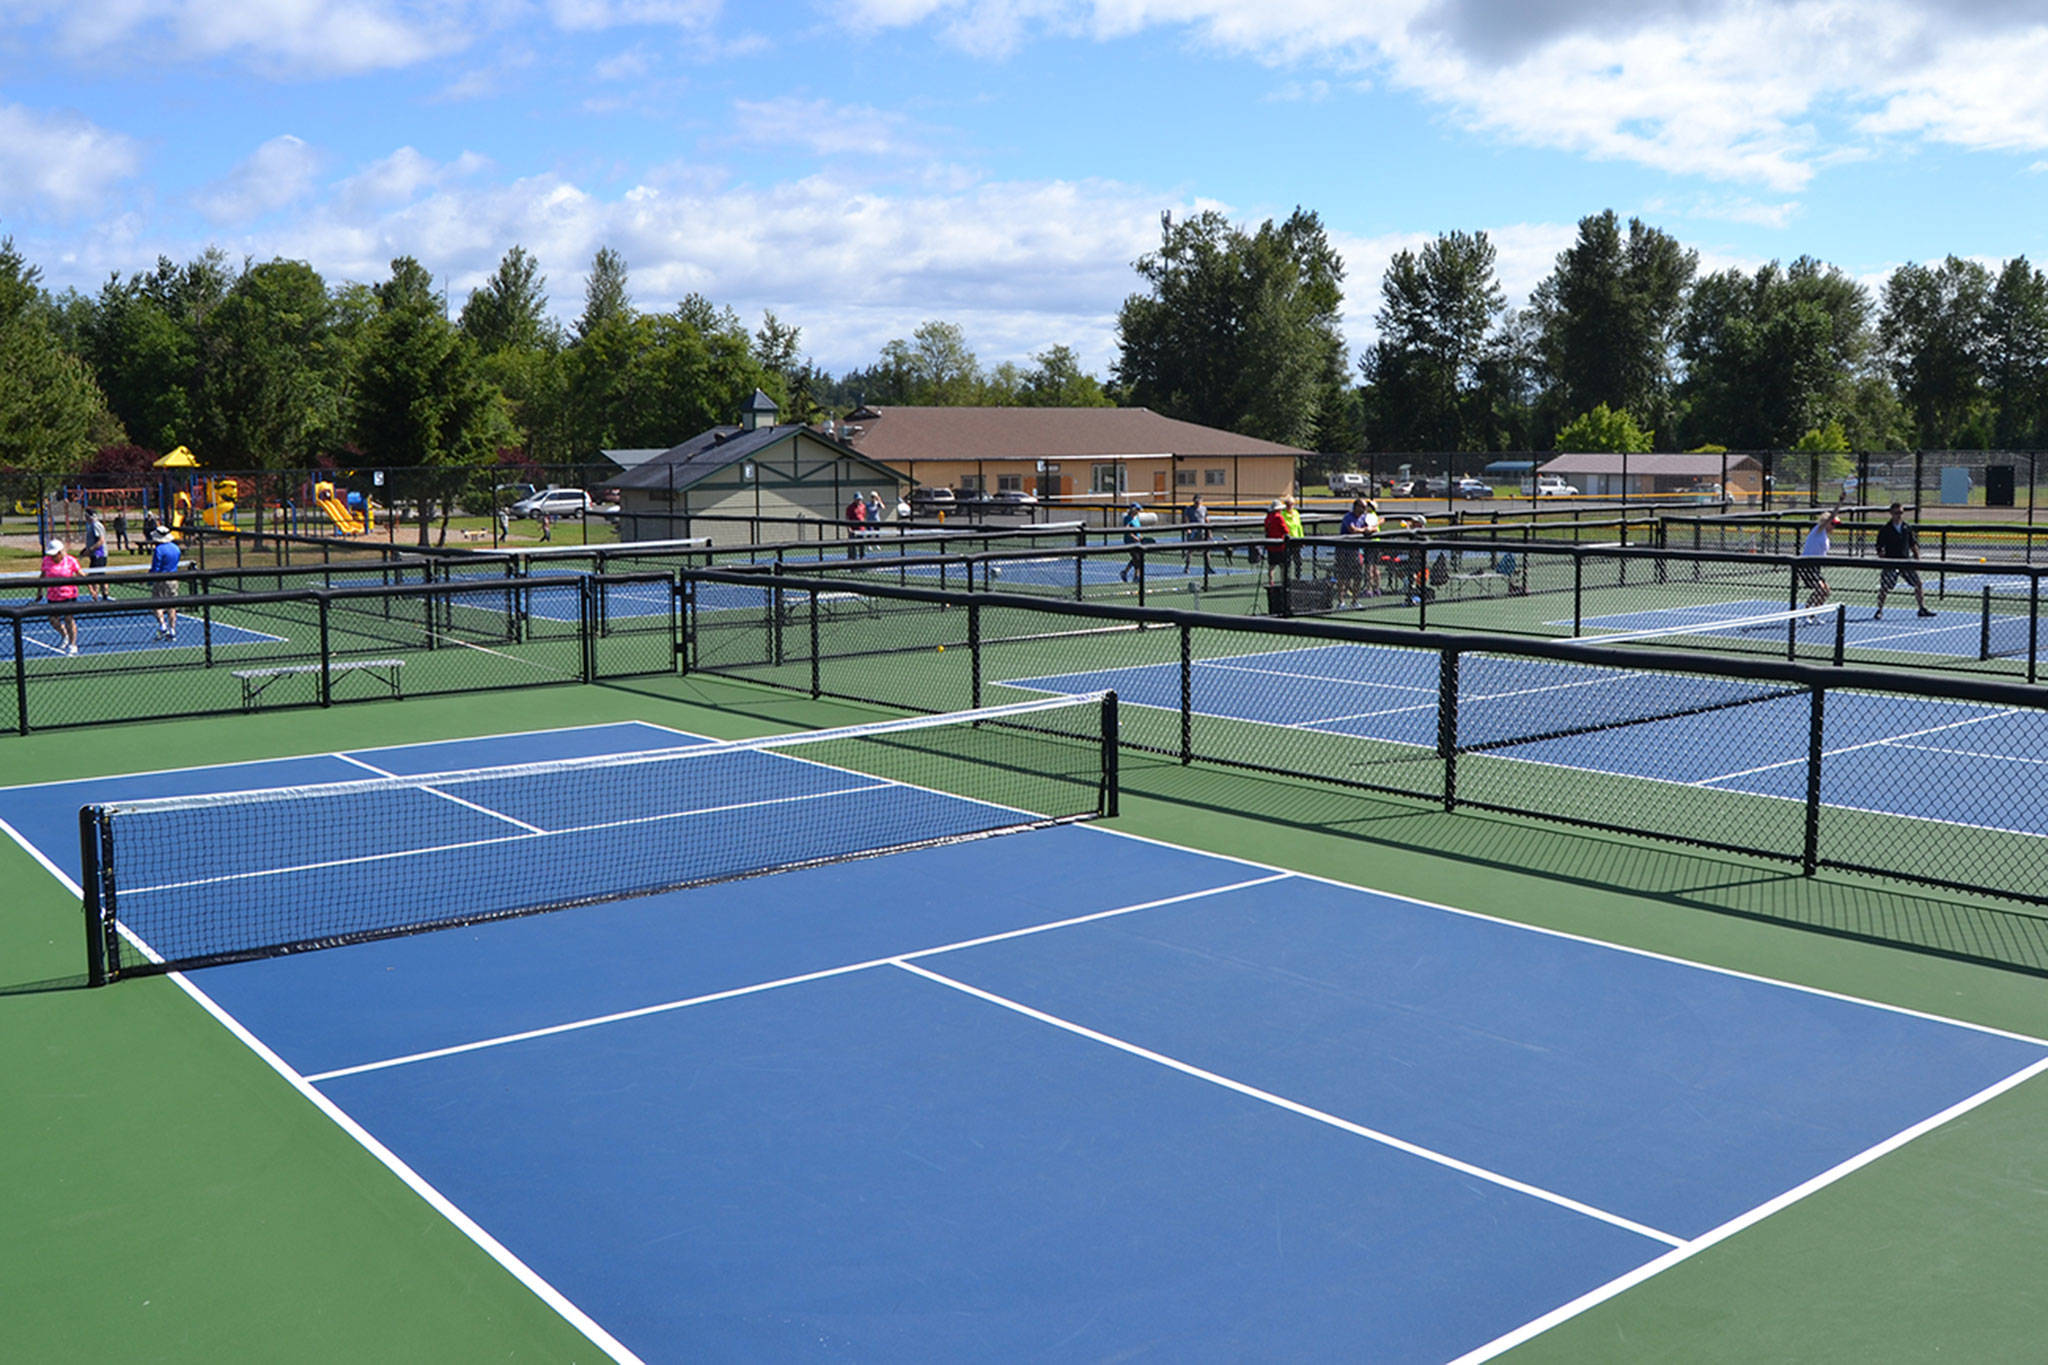 The newest addition to Carrie Blake Community Park, pickleball courts, opened to the public on June 28. Michael Dashiell/Olympic Peninsula News Group